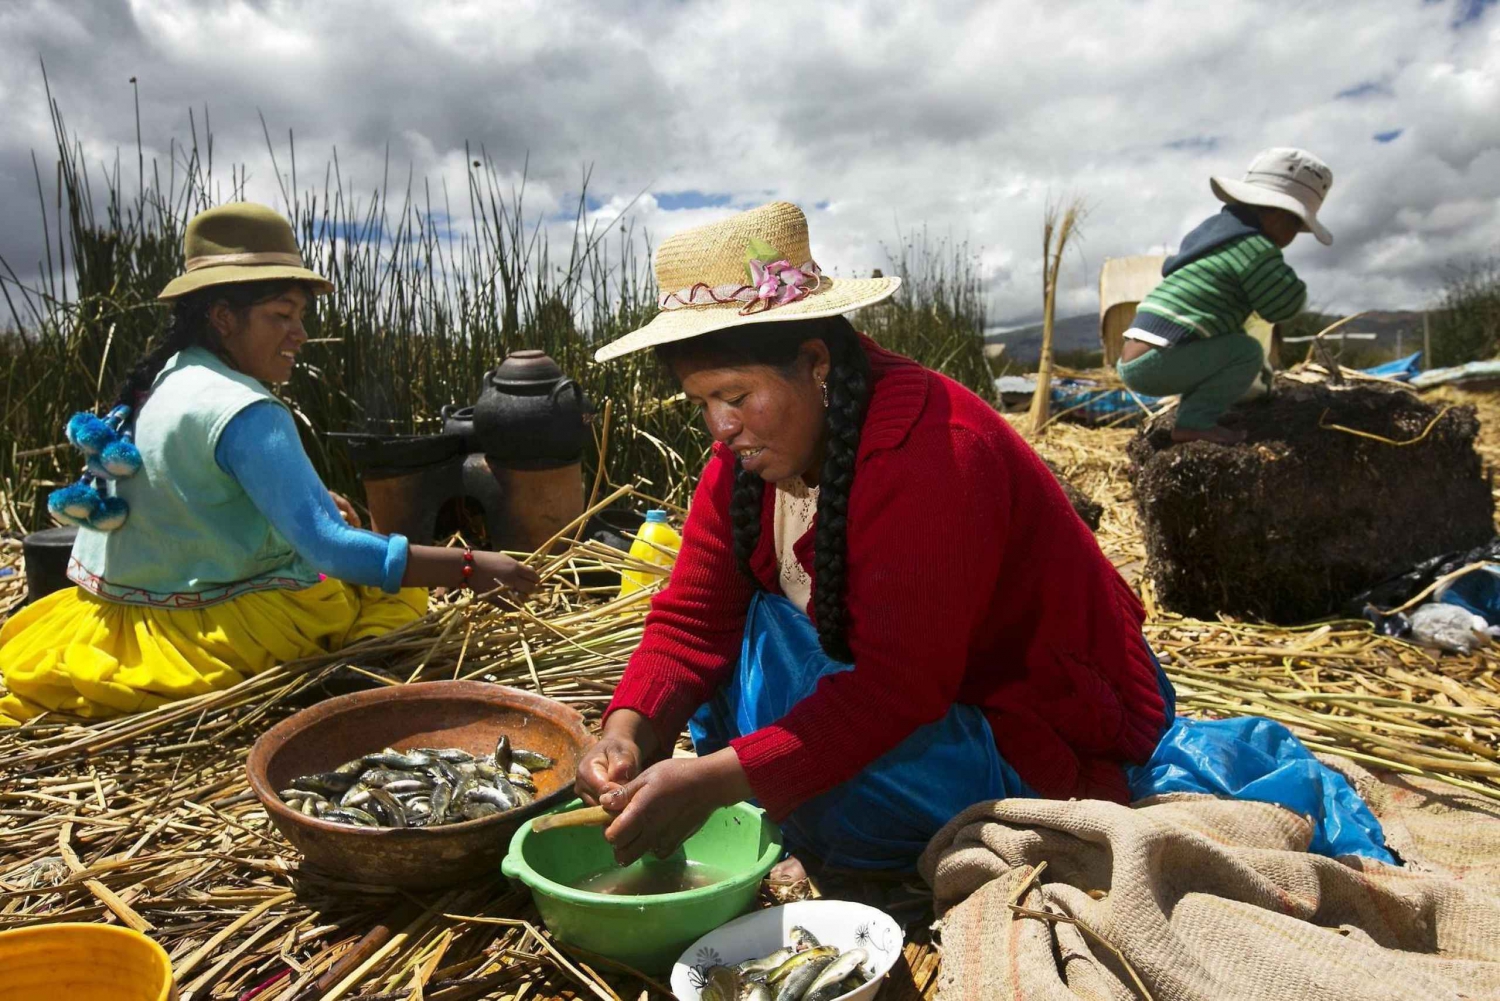 Half-Day Uros Floating Islands Tour from Puno